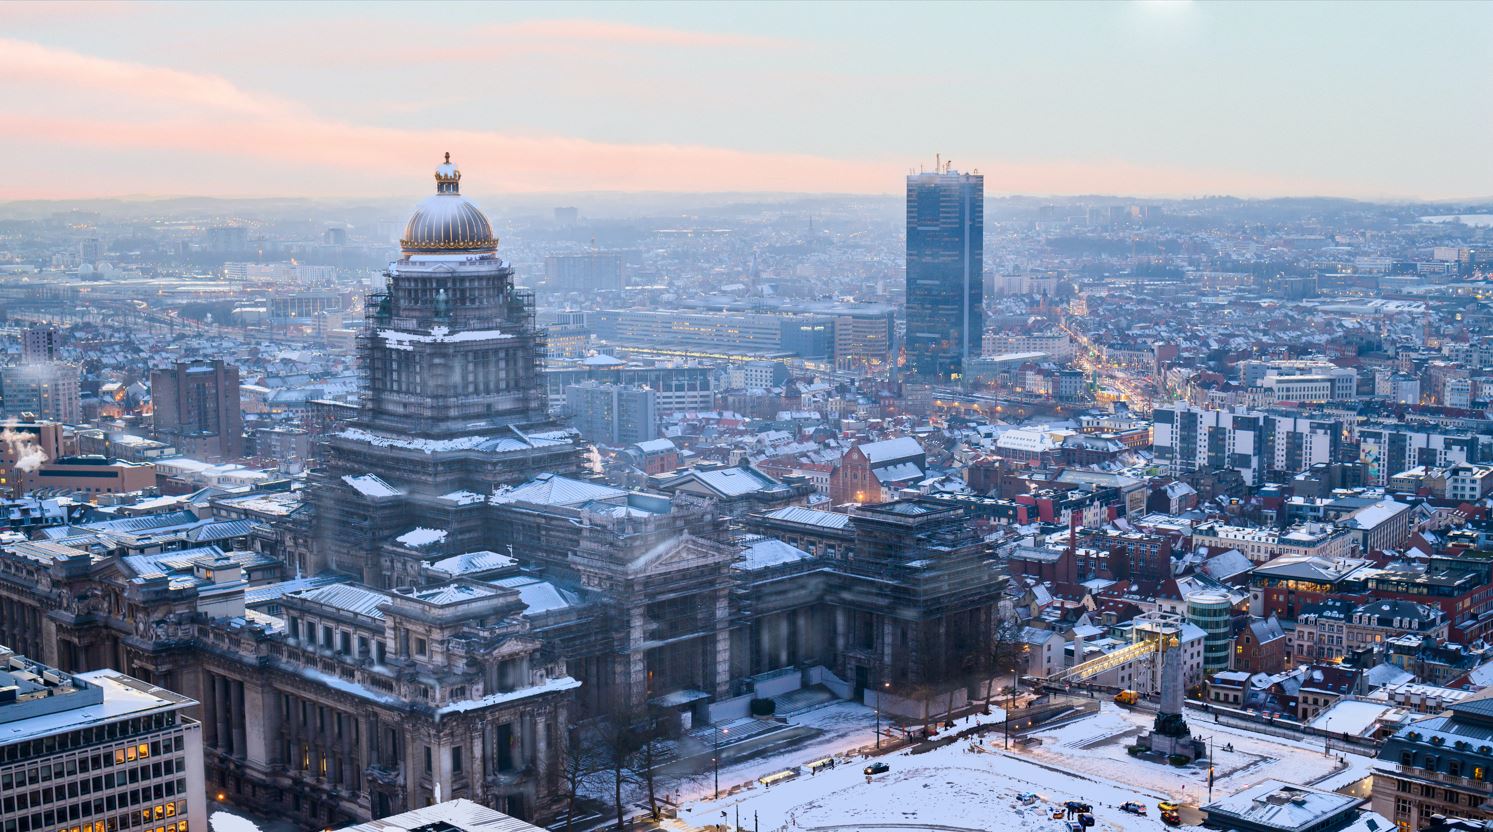 Brussels under the snow